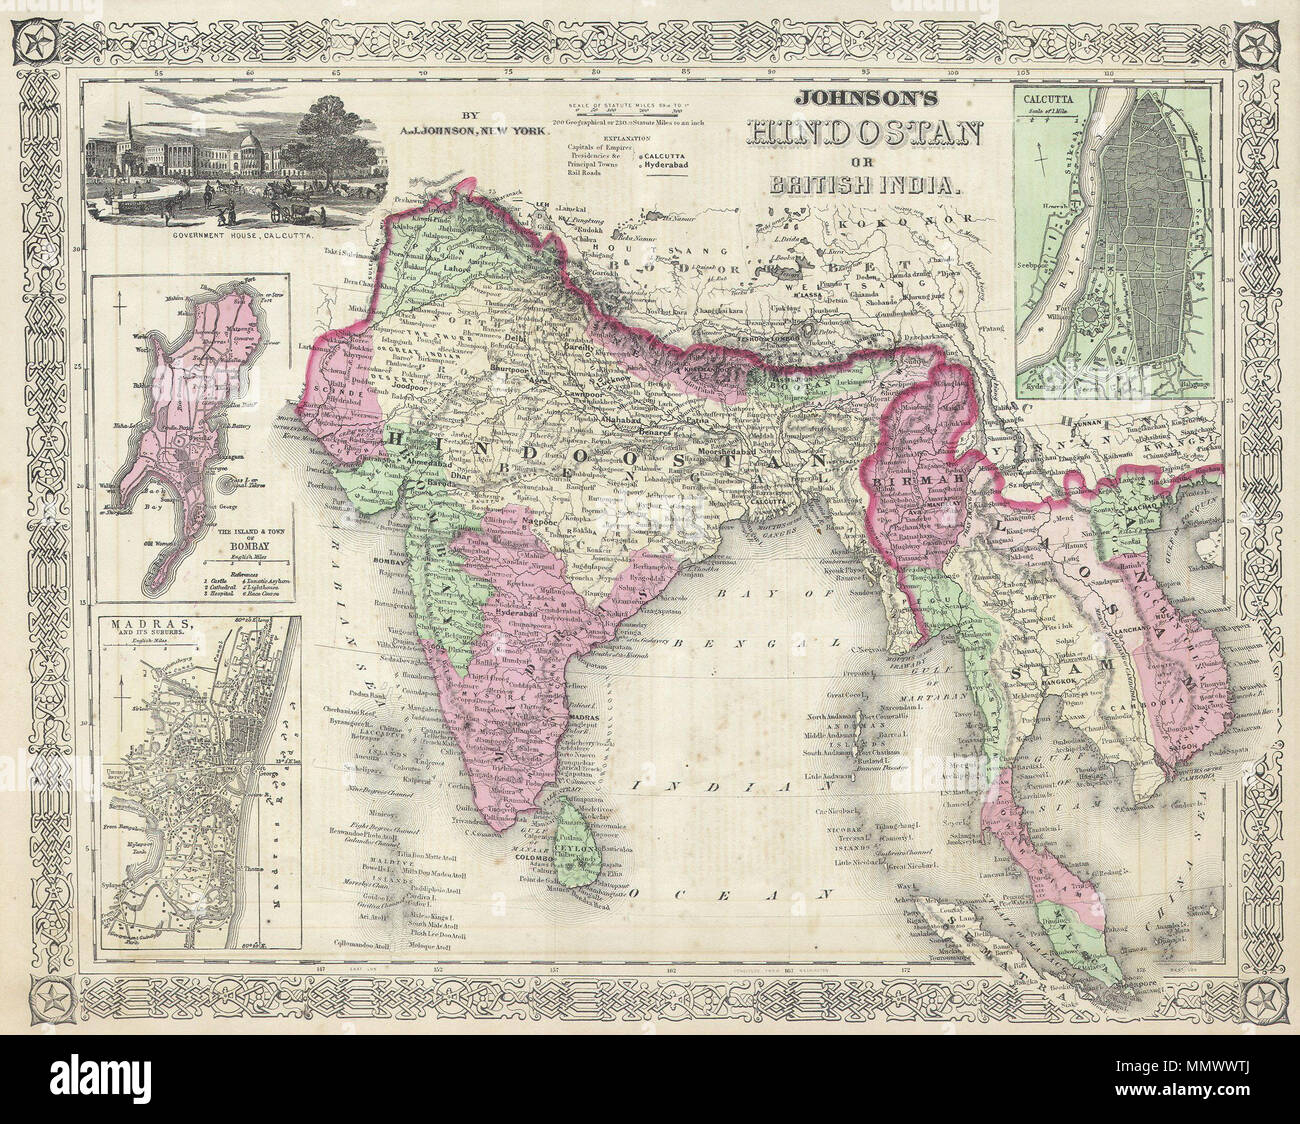 .  English: A very nice example of A. J. Johnson’s 1864 map of India and Southeast Asia. Covers from the Indus River eastward to include all of India, Burma, Siam (Thailand), Laos, Cambodia, Malaysia (Malacca) and Vietnam (Tonquin and Chochin). Also includes parts of Pakistan, Nepal, China, Bhutan, Sumatra and Ceylon (Sri Lanka). Offers color coding according to country and region as well as notations regarding roadways, cities, towns, and river systems. Three inset maps focus on the Island of Bombay (Mumbai), Madras, and Calcutta. An view of the Government House and Treasury in Calcutta adorn Stock Photo